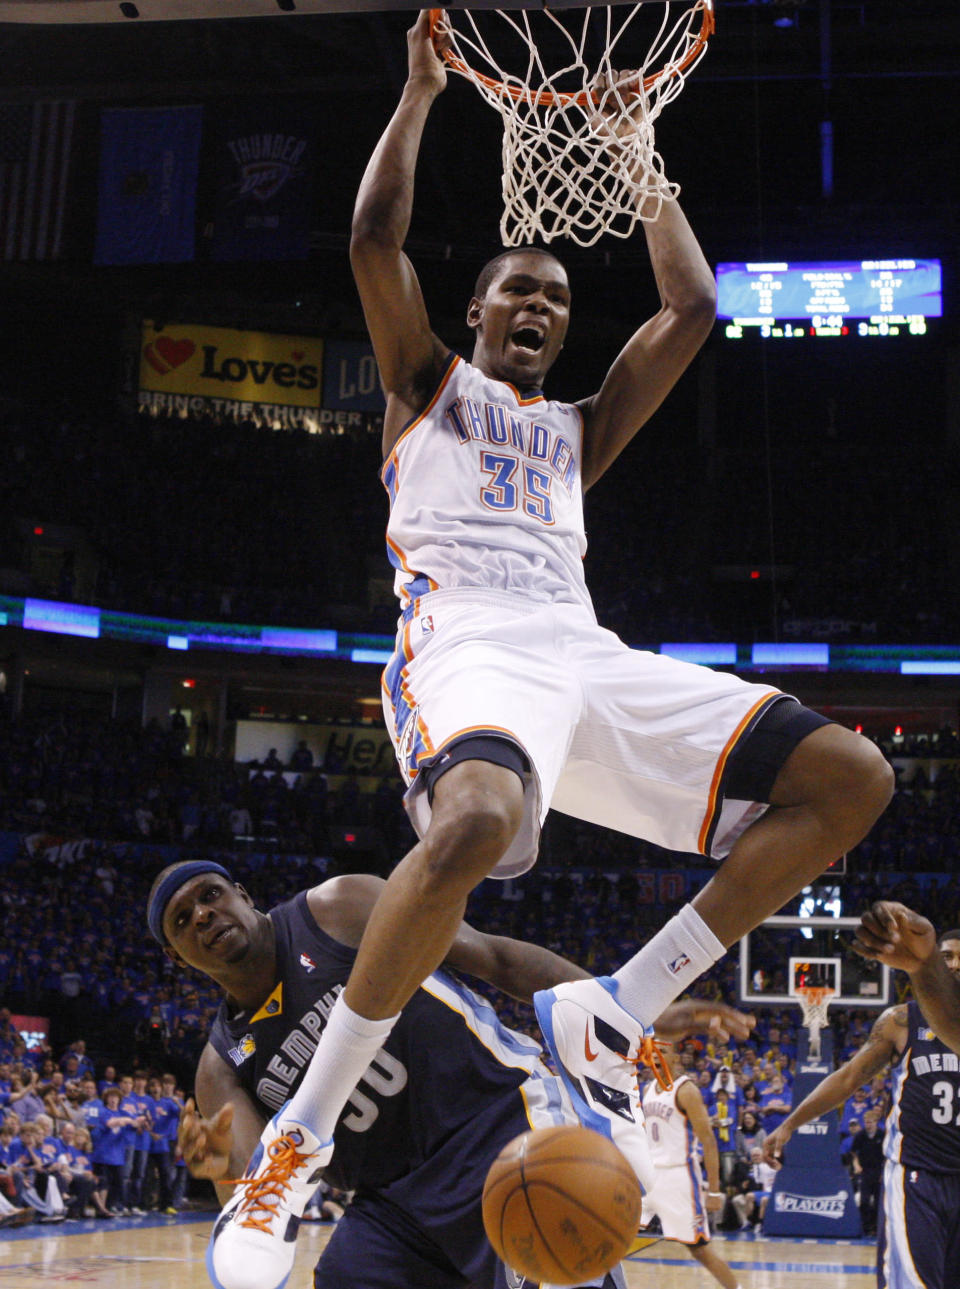 In this May 15, 2011, file photo, Oklahoma City Thunder forward Kevin Durant, front, celebrates after dunking in front of Memphis Grizzlies forward Zach Randolph during Game 7 of a second-round NBA basketball playoff series in Oklahoma City. (AP Photo/Sue Ogrocki, File)